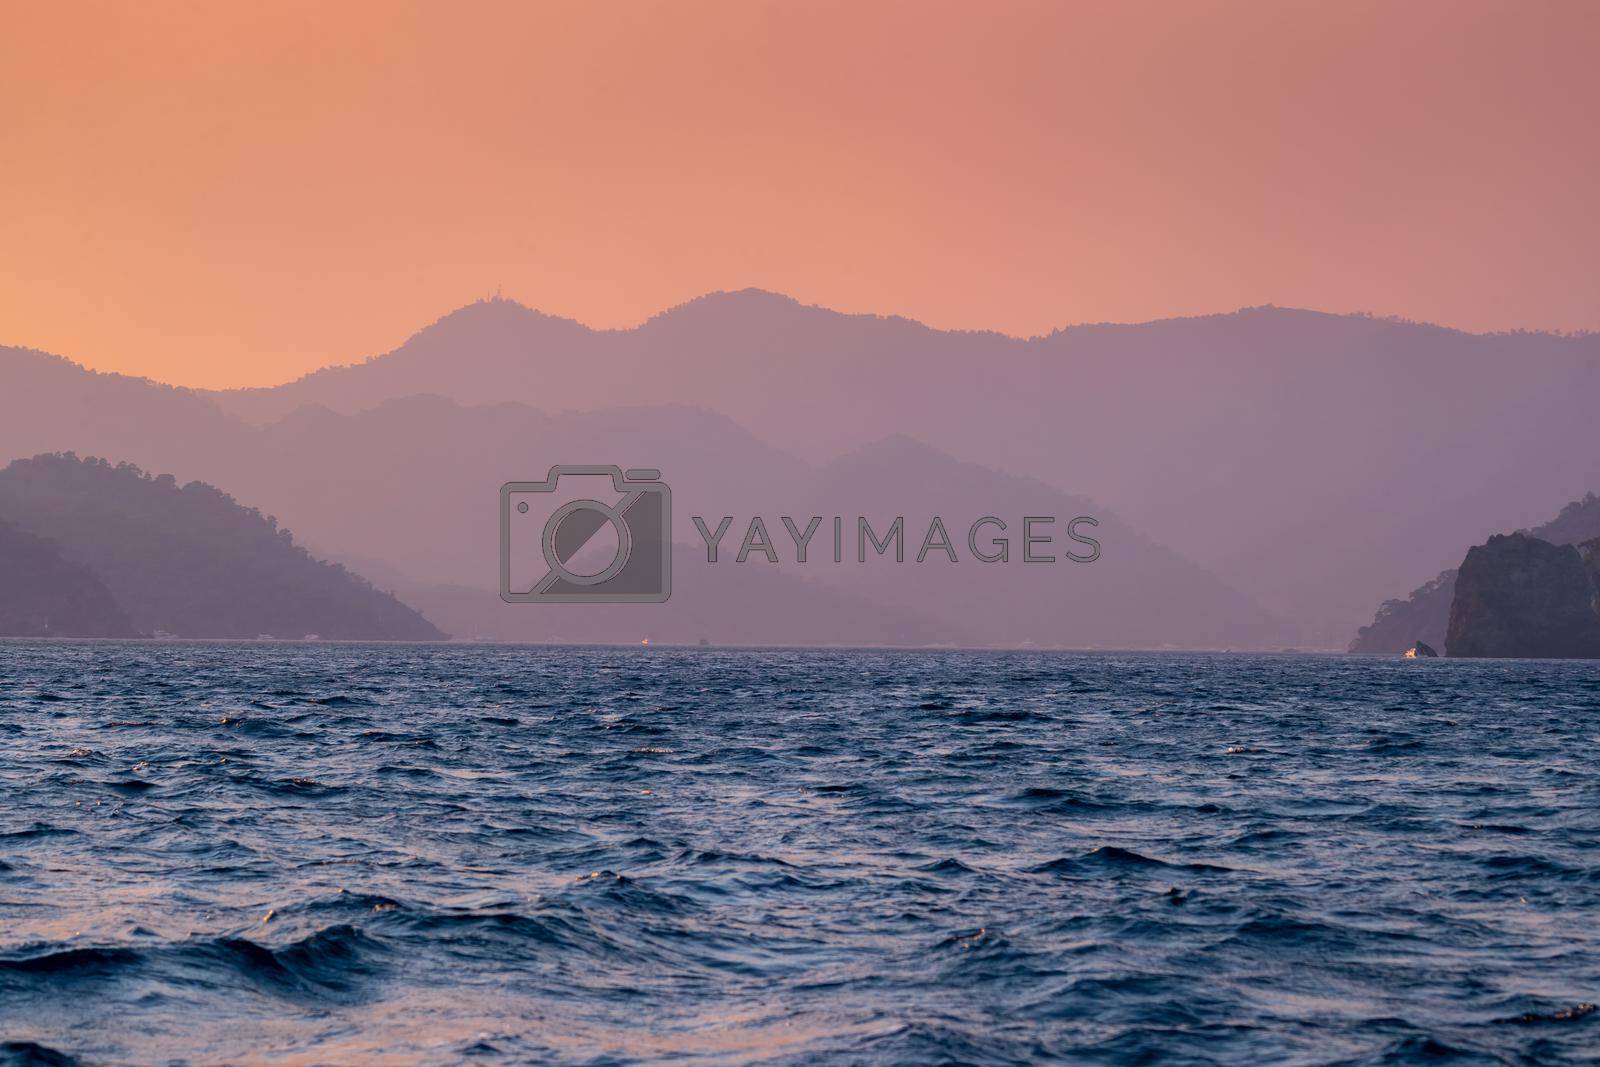 Royalty free image of Beautiful Sea Scape by Anna_Omelchenko